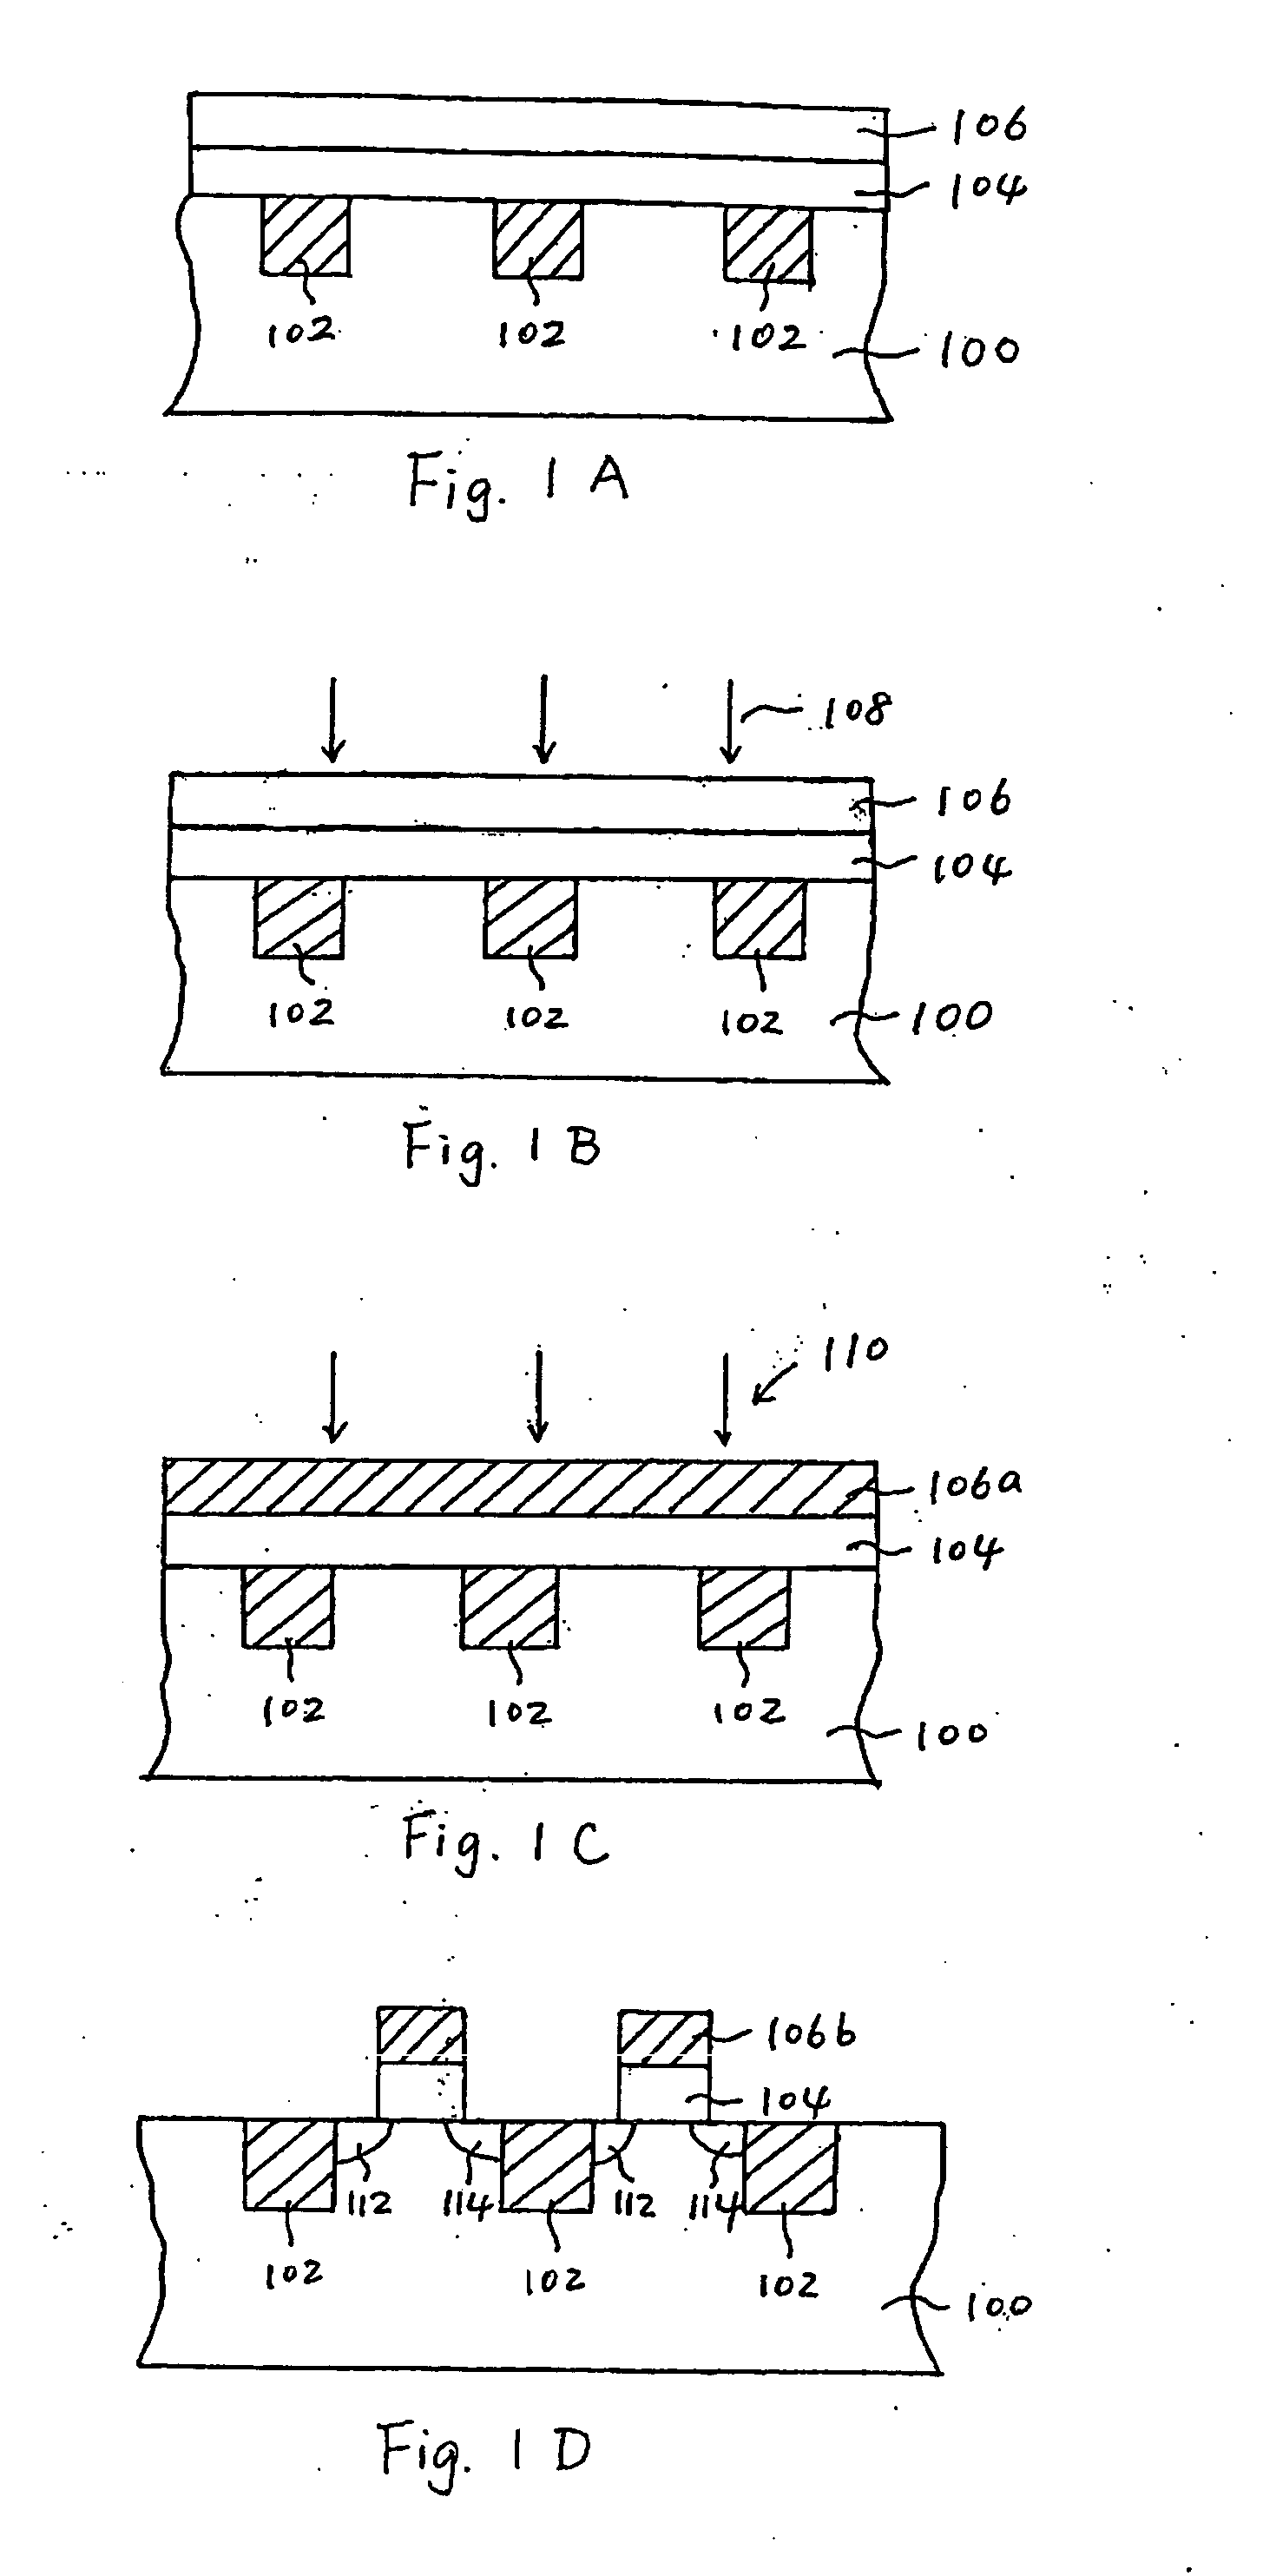 Method for suppressing boron penetration by implantation in P+ MOSFETS